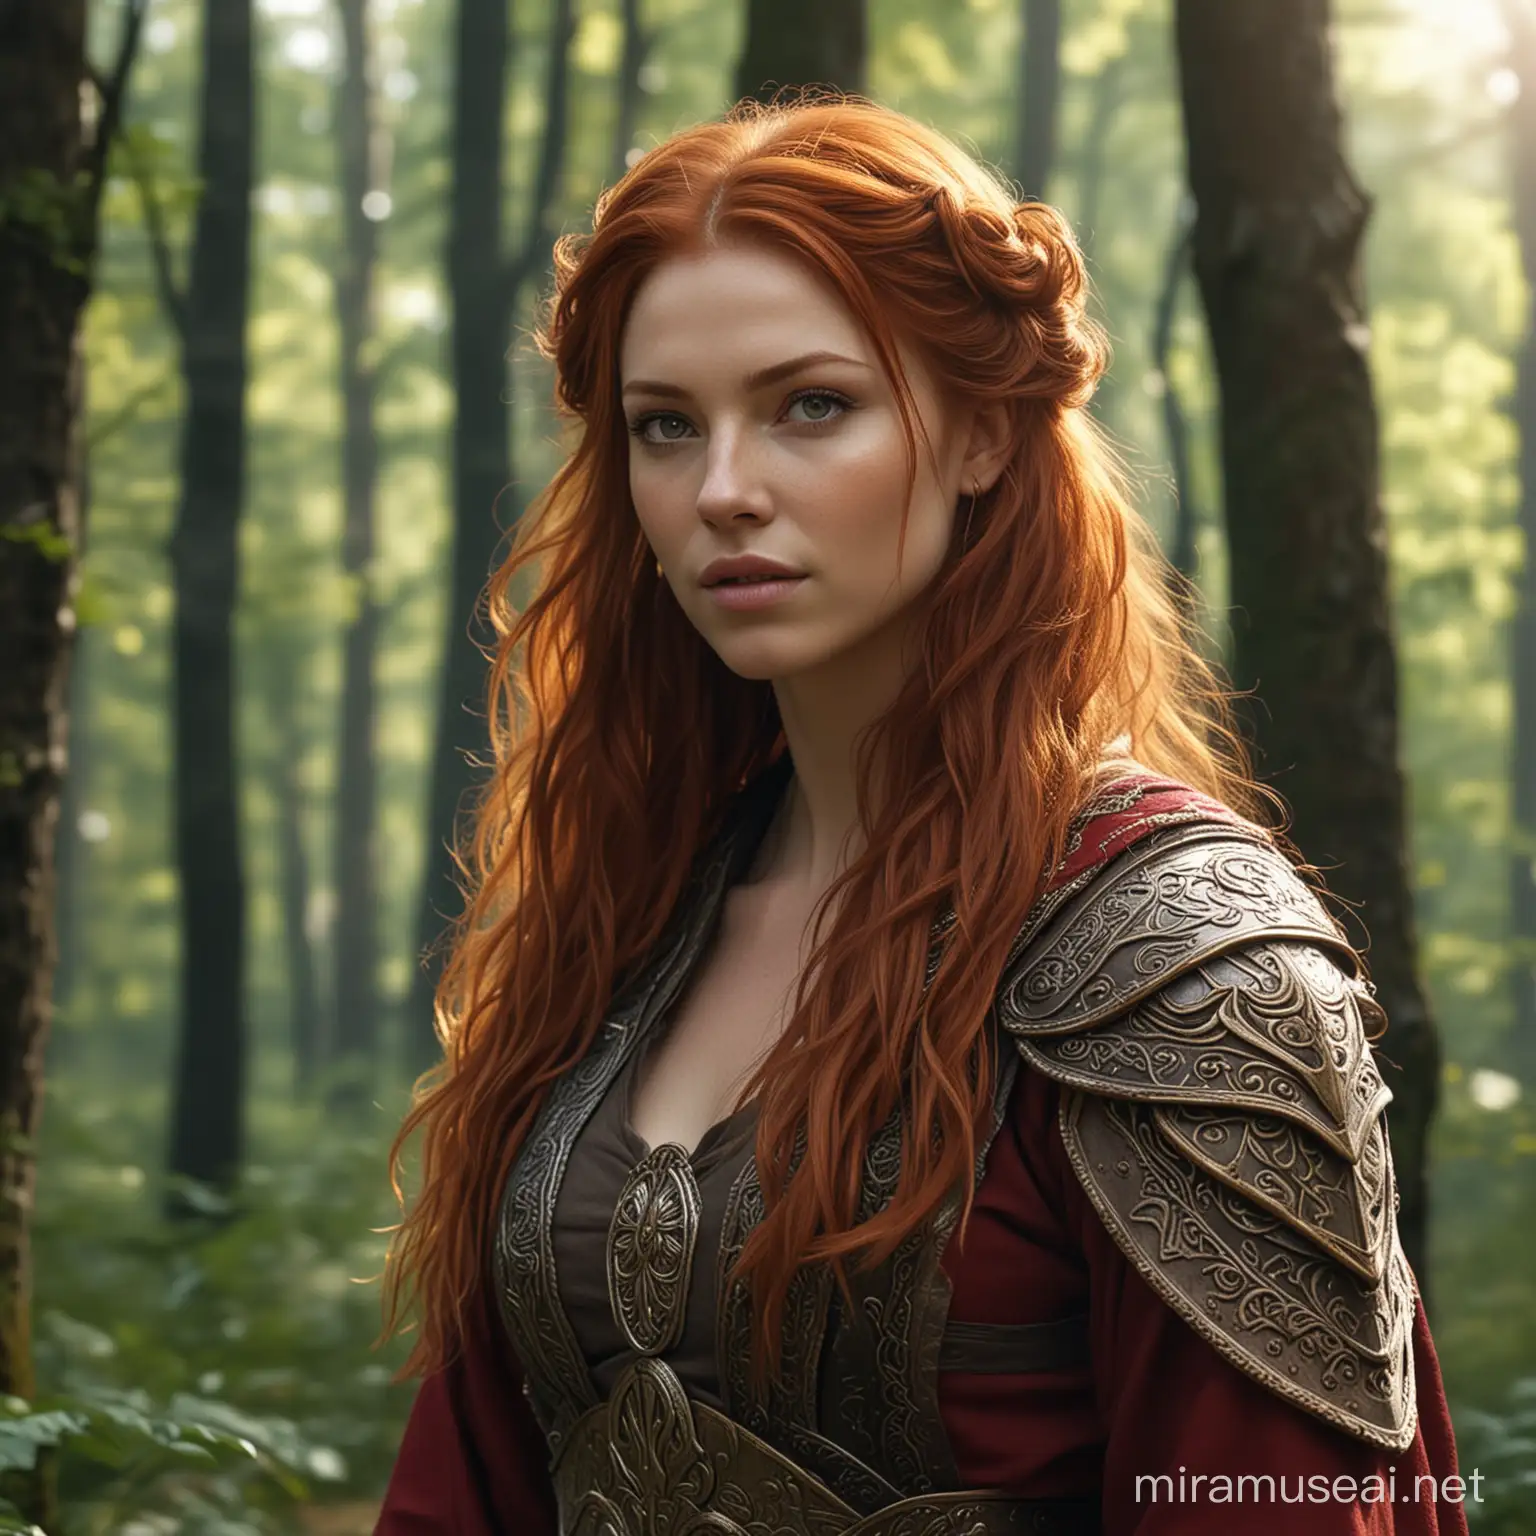 Create a beautiful and ultra-realistic image of a beautiful redhead with long and beautiful hair, dressed as a warrior, representing an Aries woman. His gaze is penetrating and enigmatic. She's in a forest. Show off the richness of detail in 8k. She has the robes like a warrior, from head to toe. She smiles, mockingly, with her head held high, bravely.